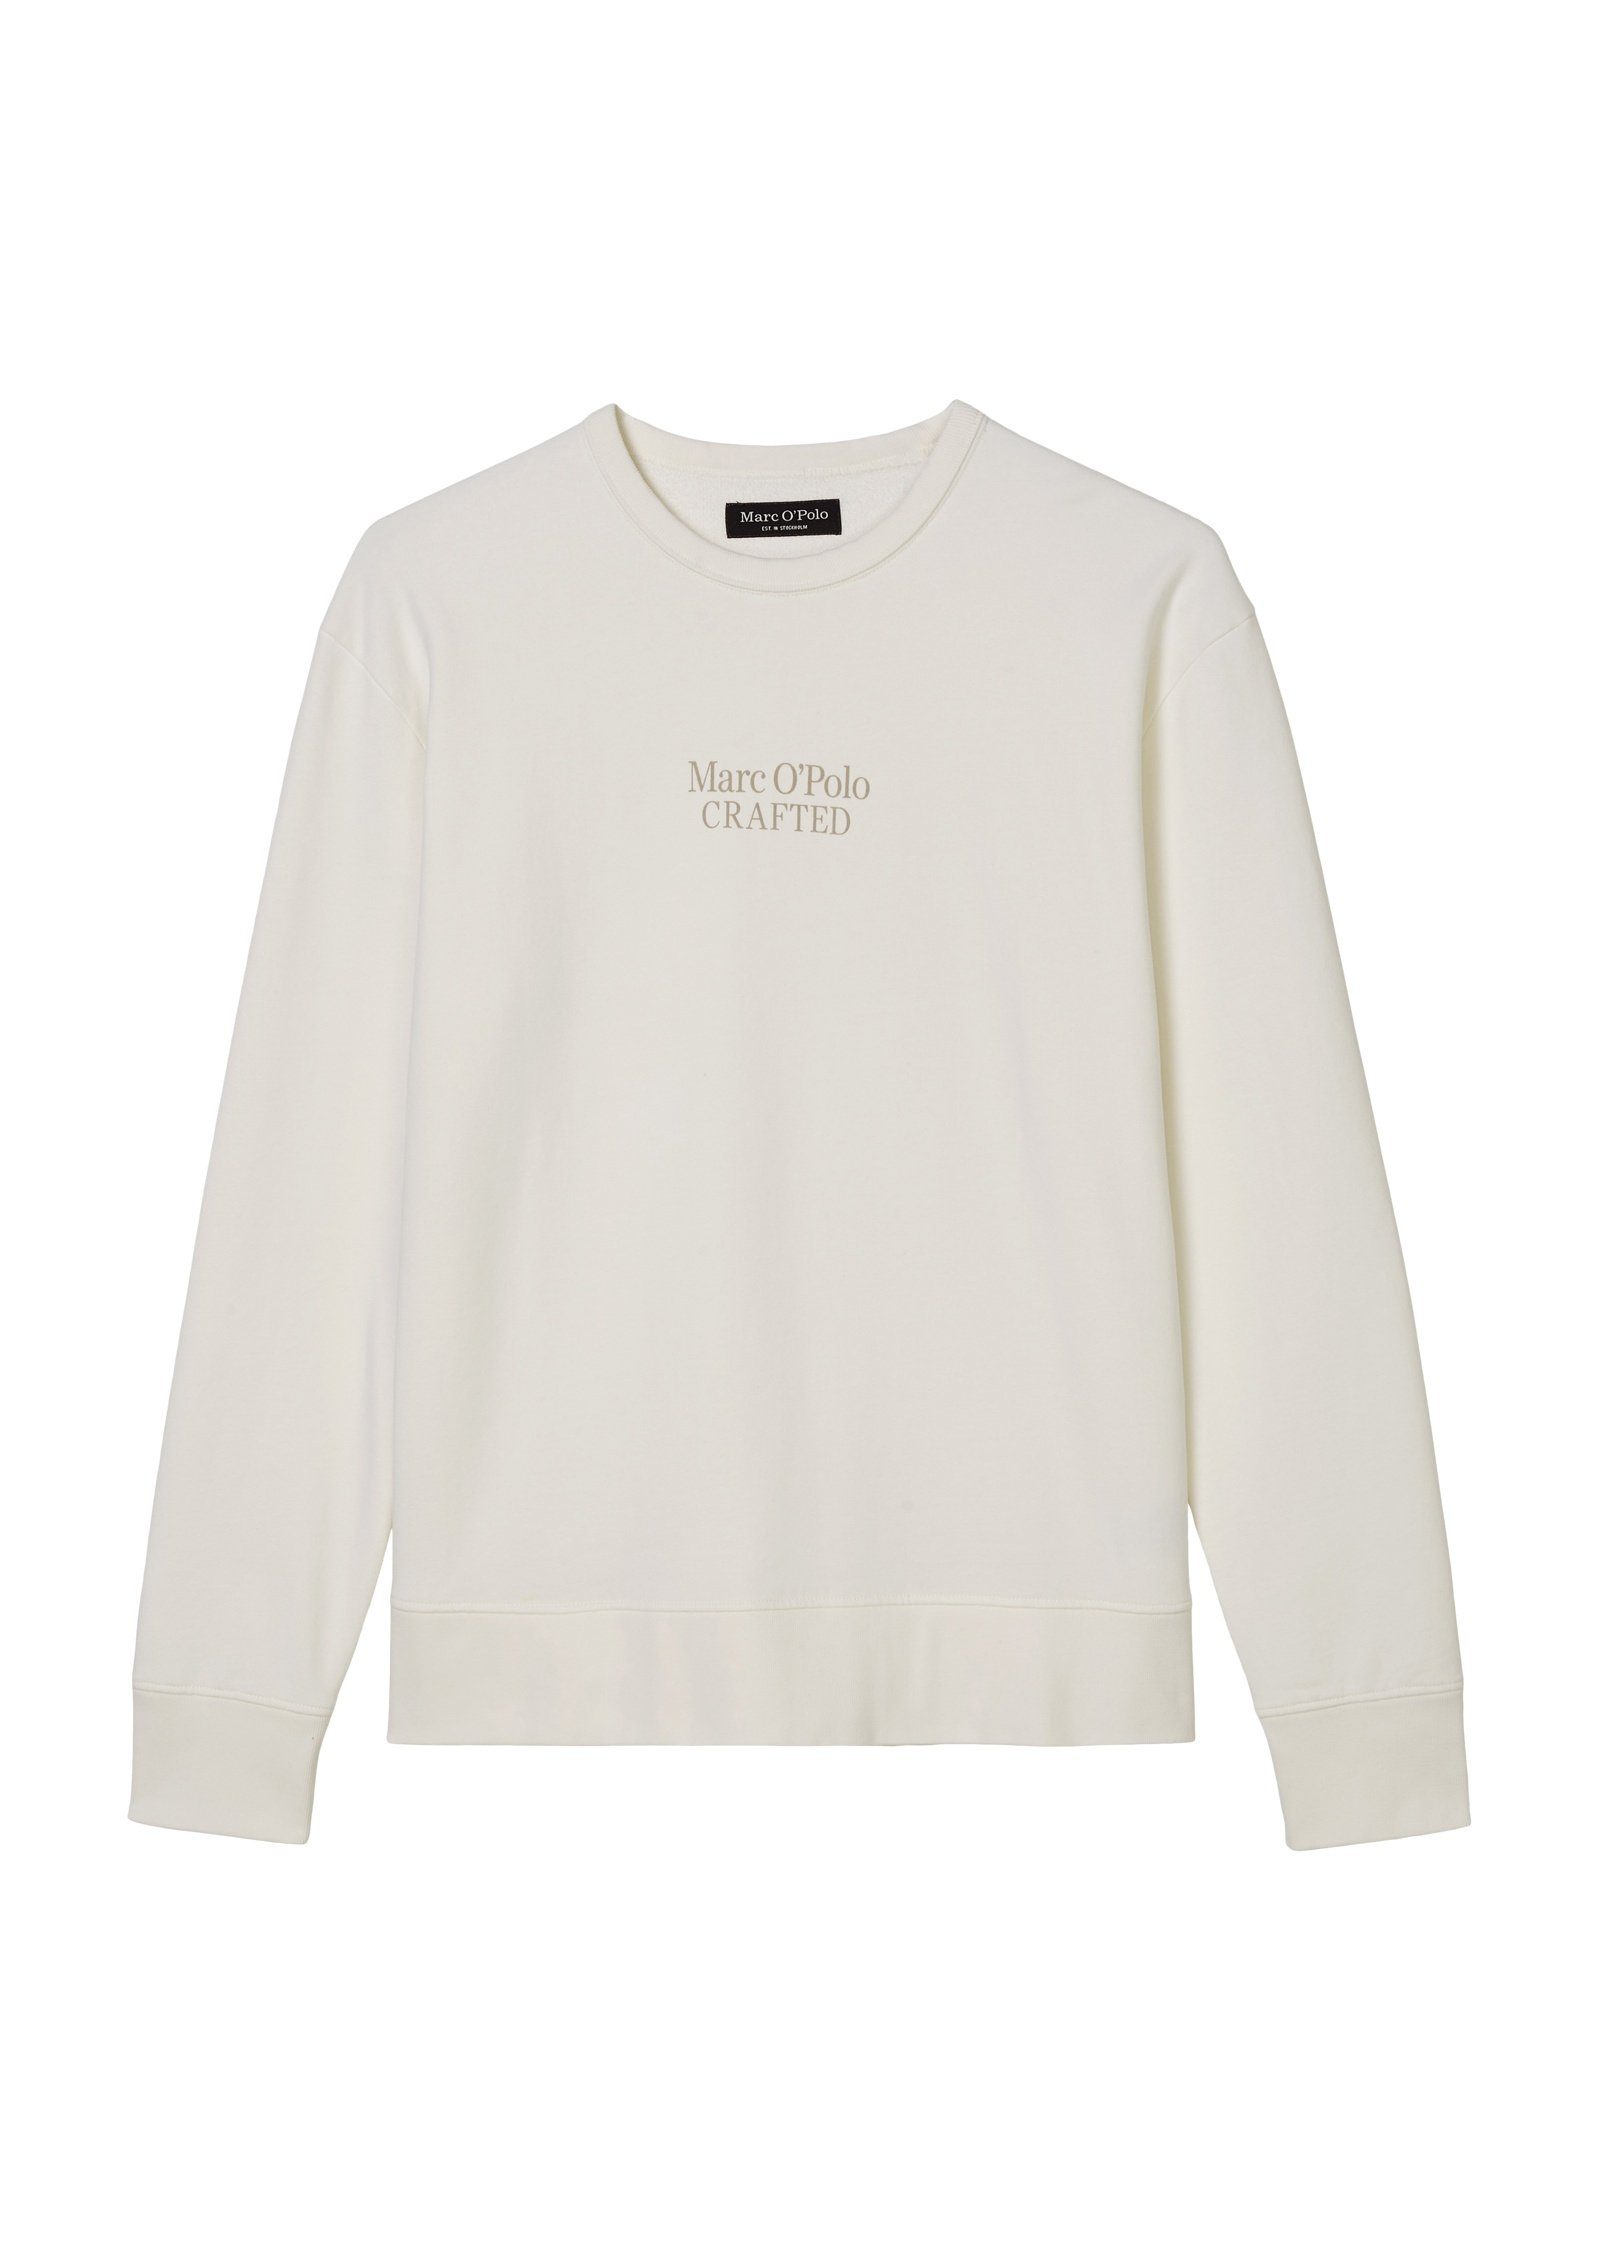 Terry-Sweat-Qualität in Marc softer O'Polo Sweatshirt